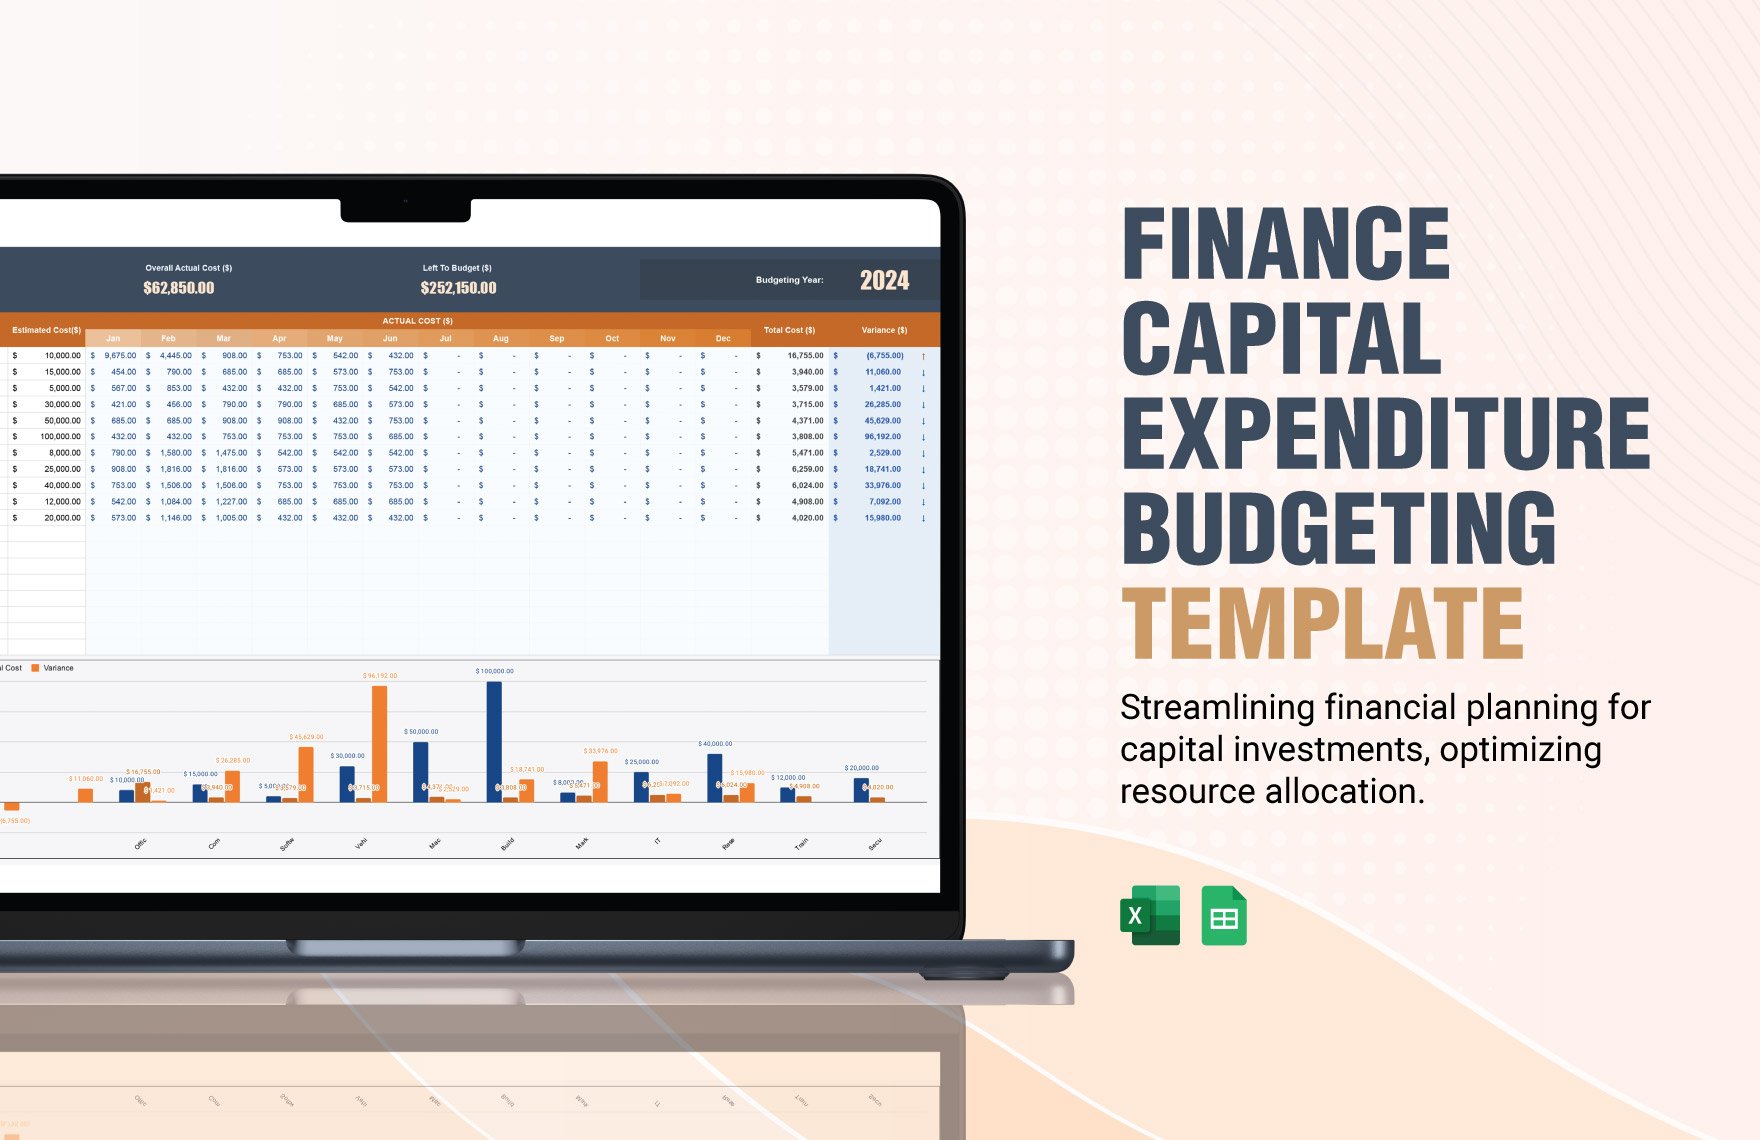 Finance Capital Expenditure Budgeting Template in Excel, Google Sheets